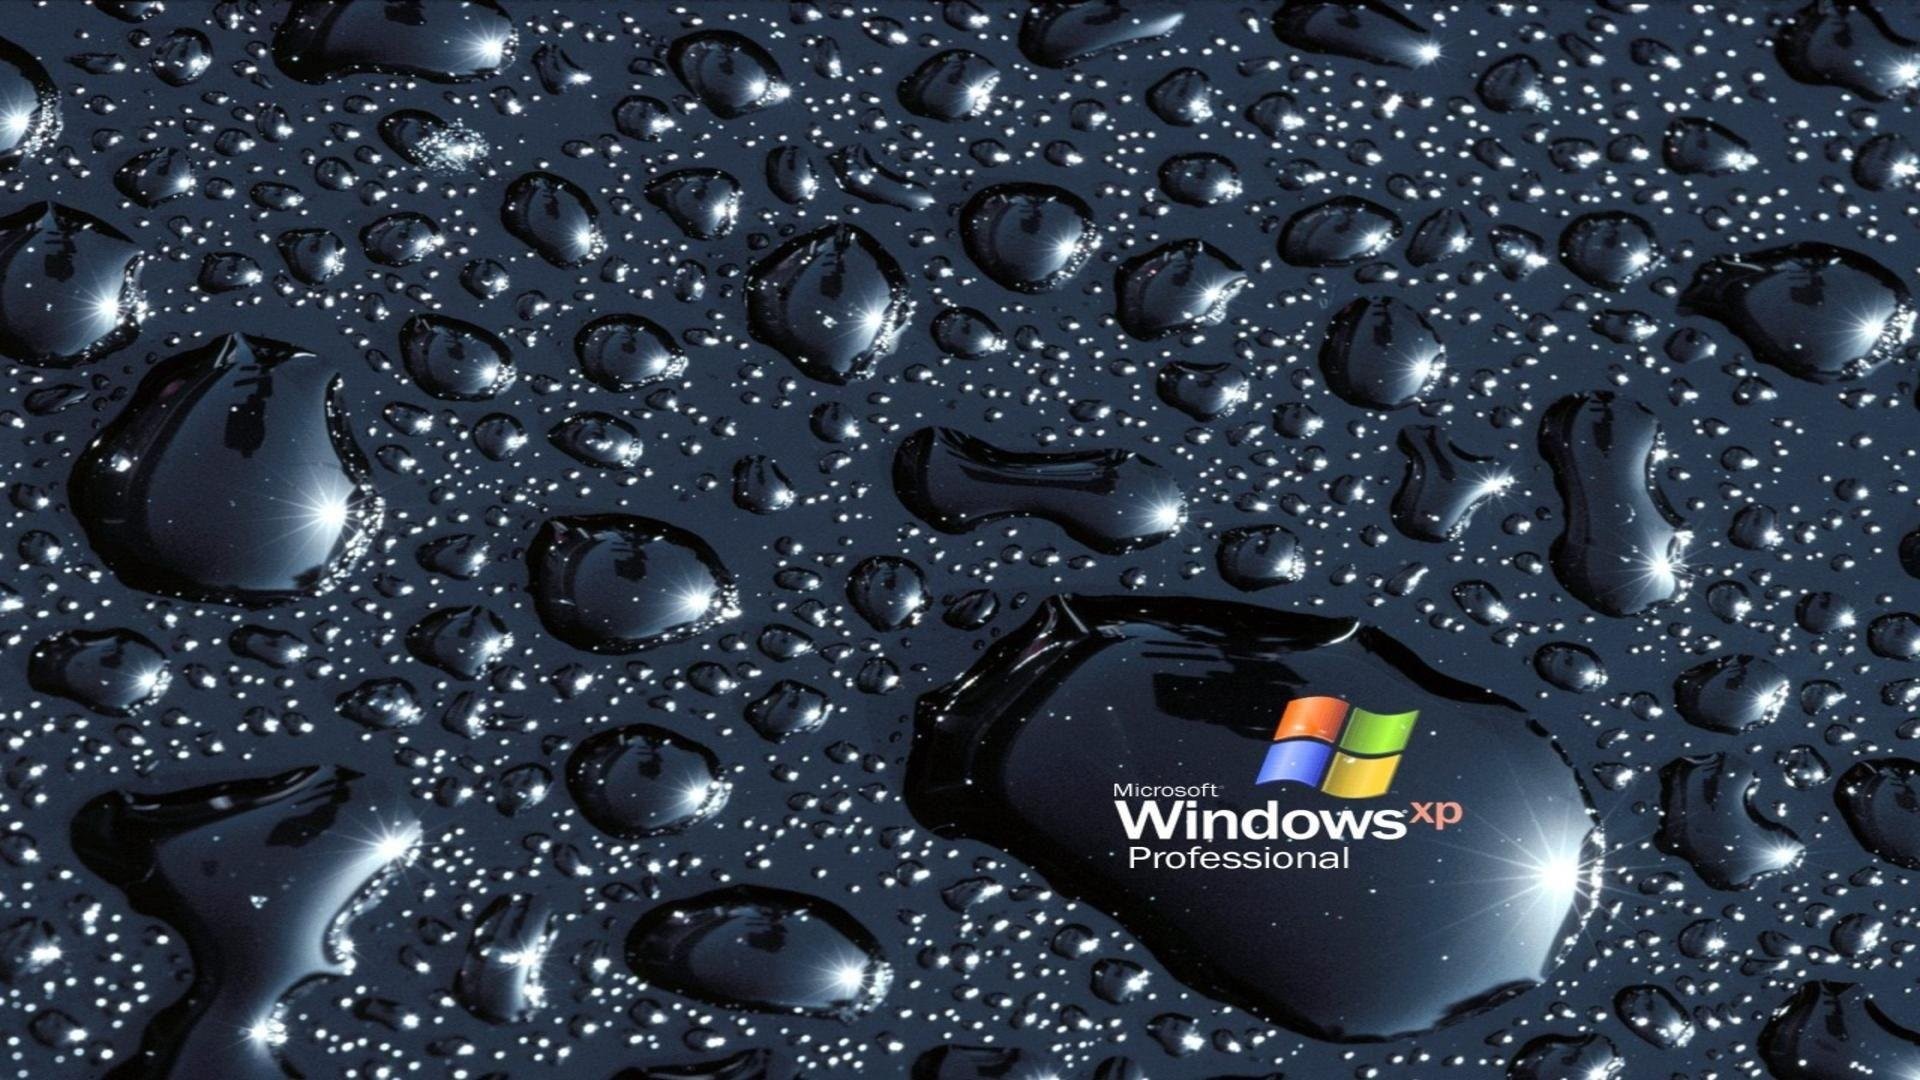 Microsoft wallpapers backgrounds themes